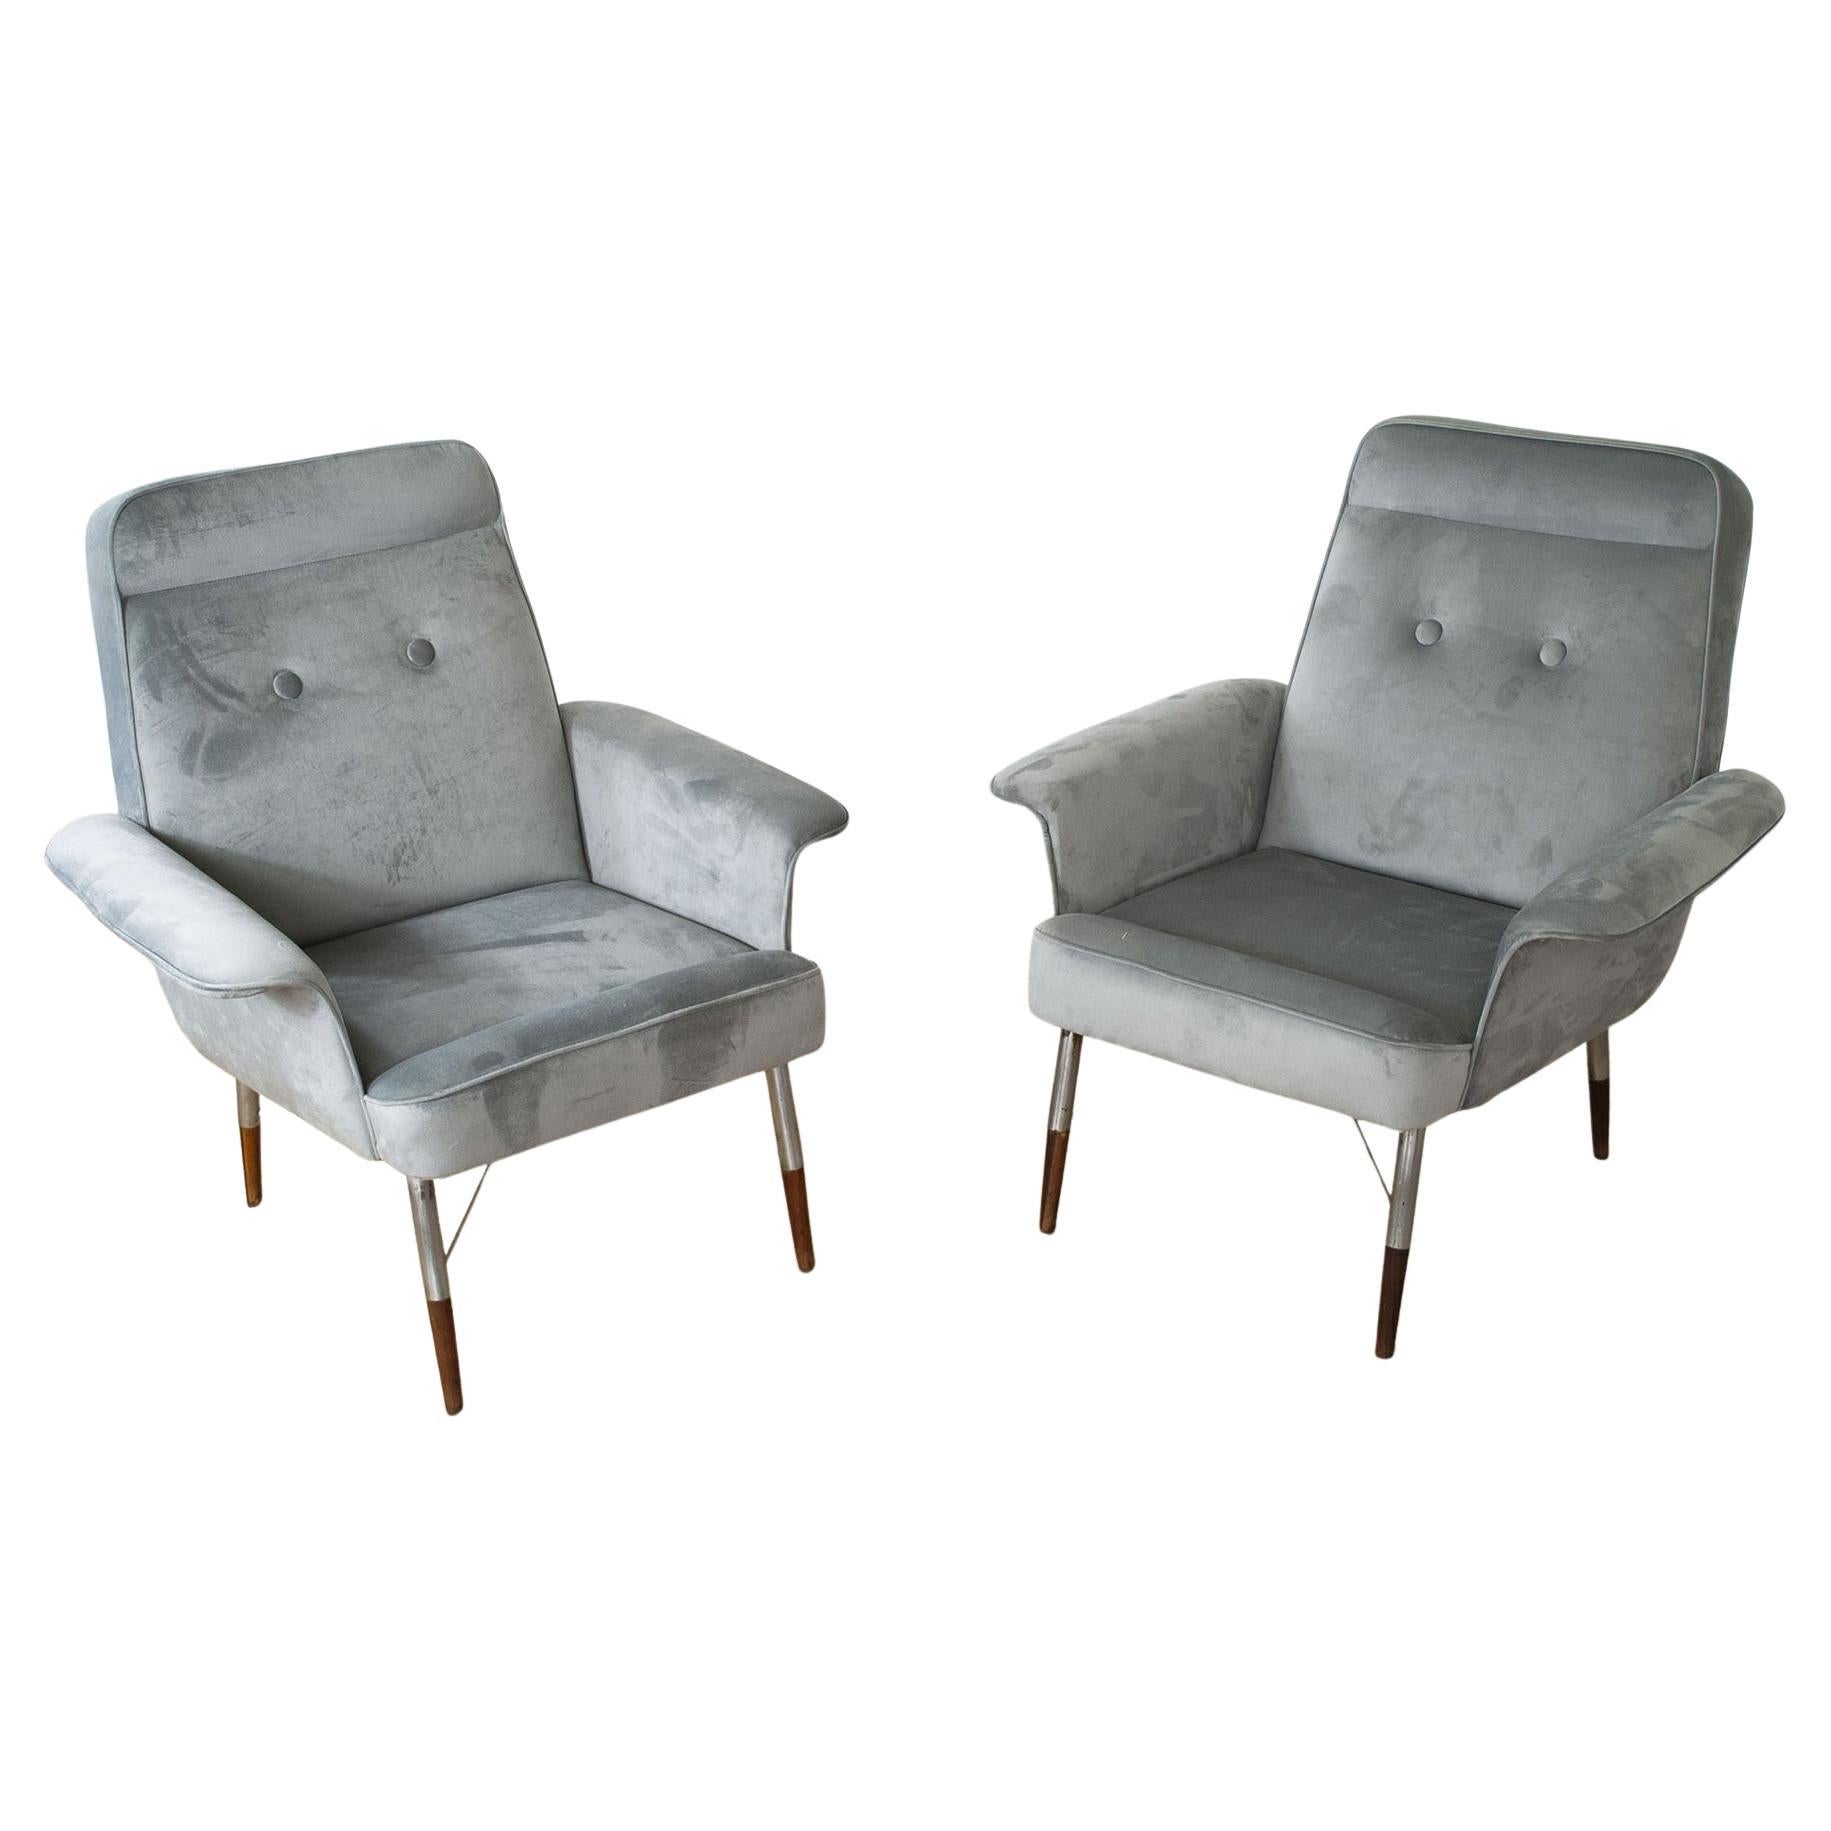 Italian Mid-Century Pair of Armchairs from the Sixties For Sale